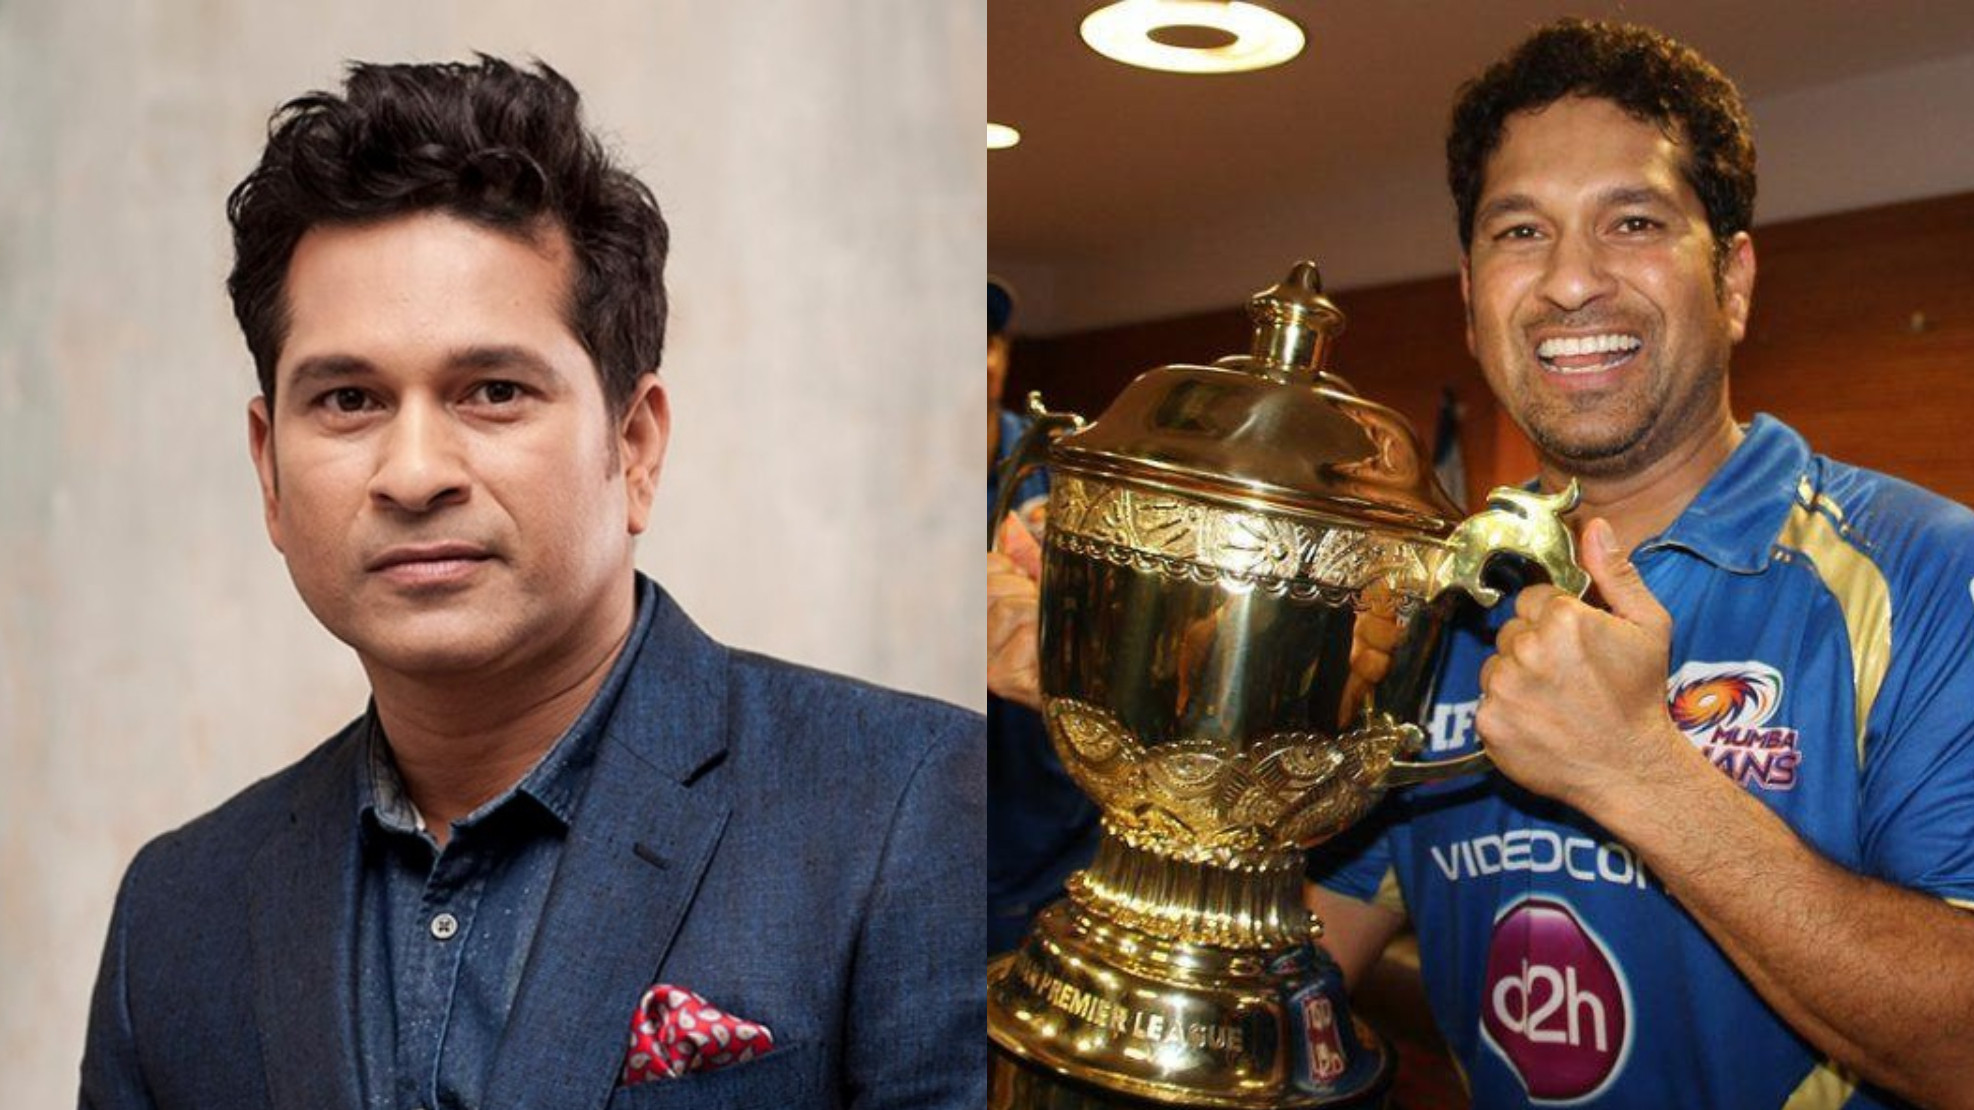 Sachin Tendulkar says the biggest change in Indian cricket happened due to IPL; opines it started a new phase